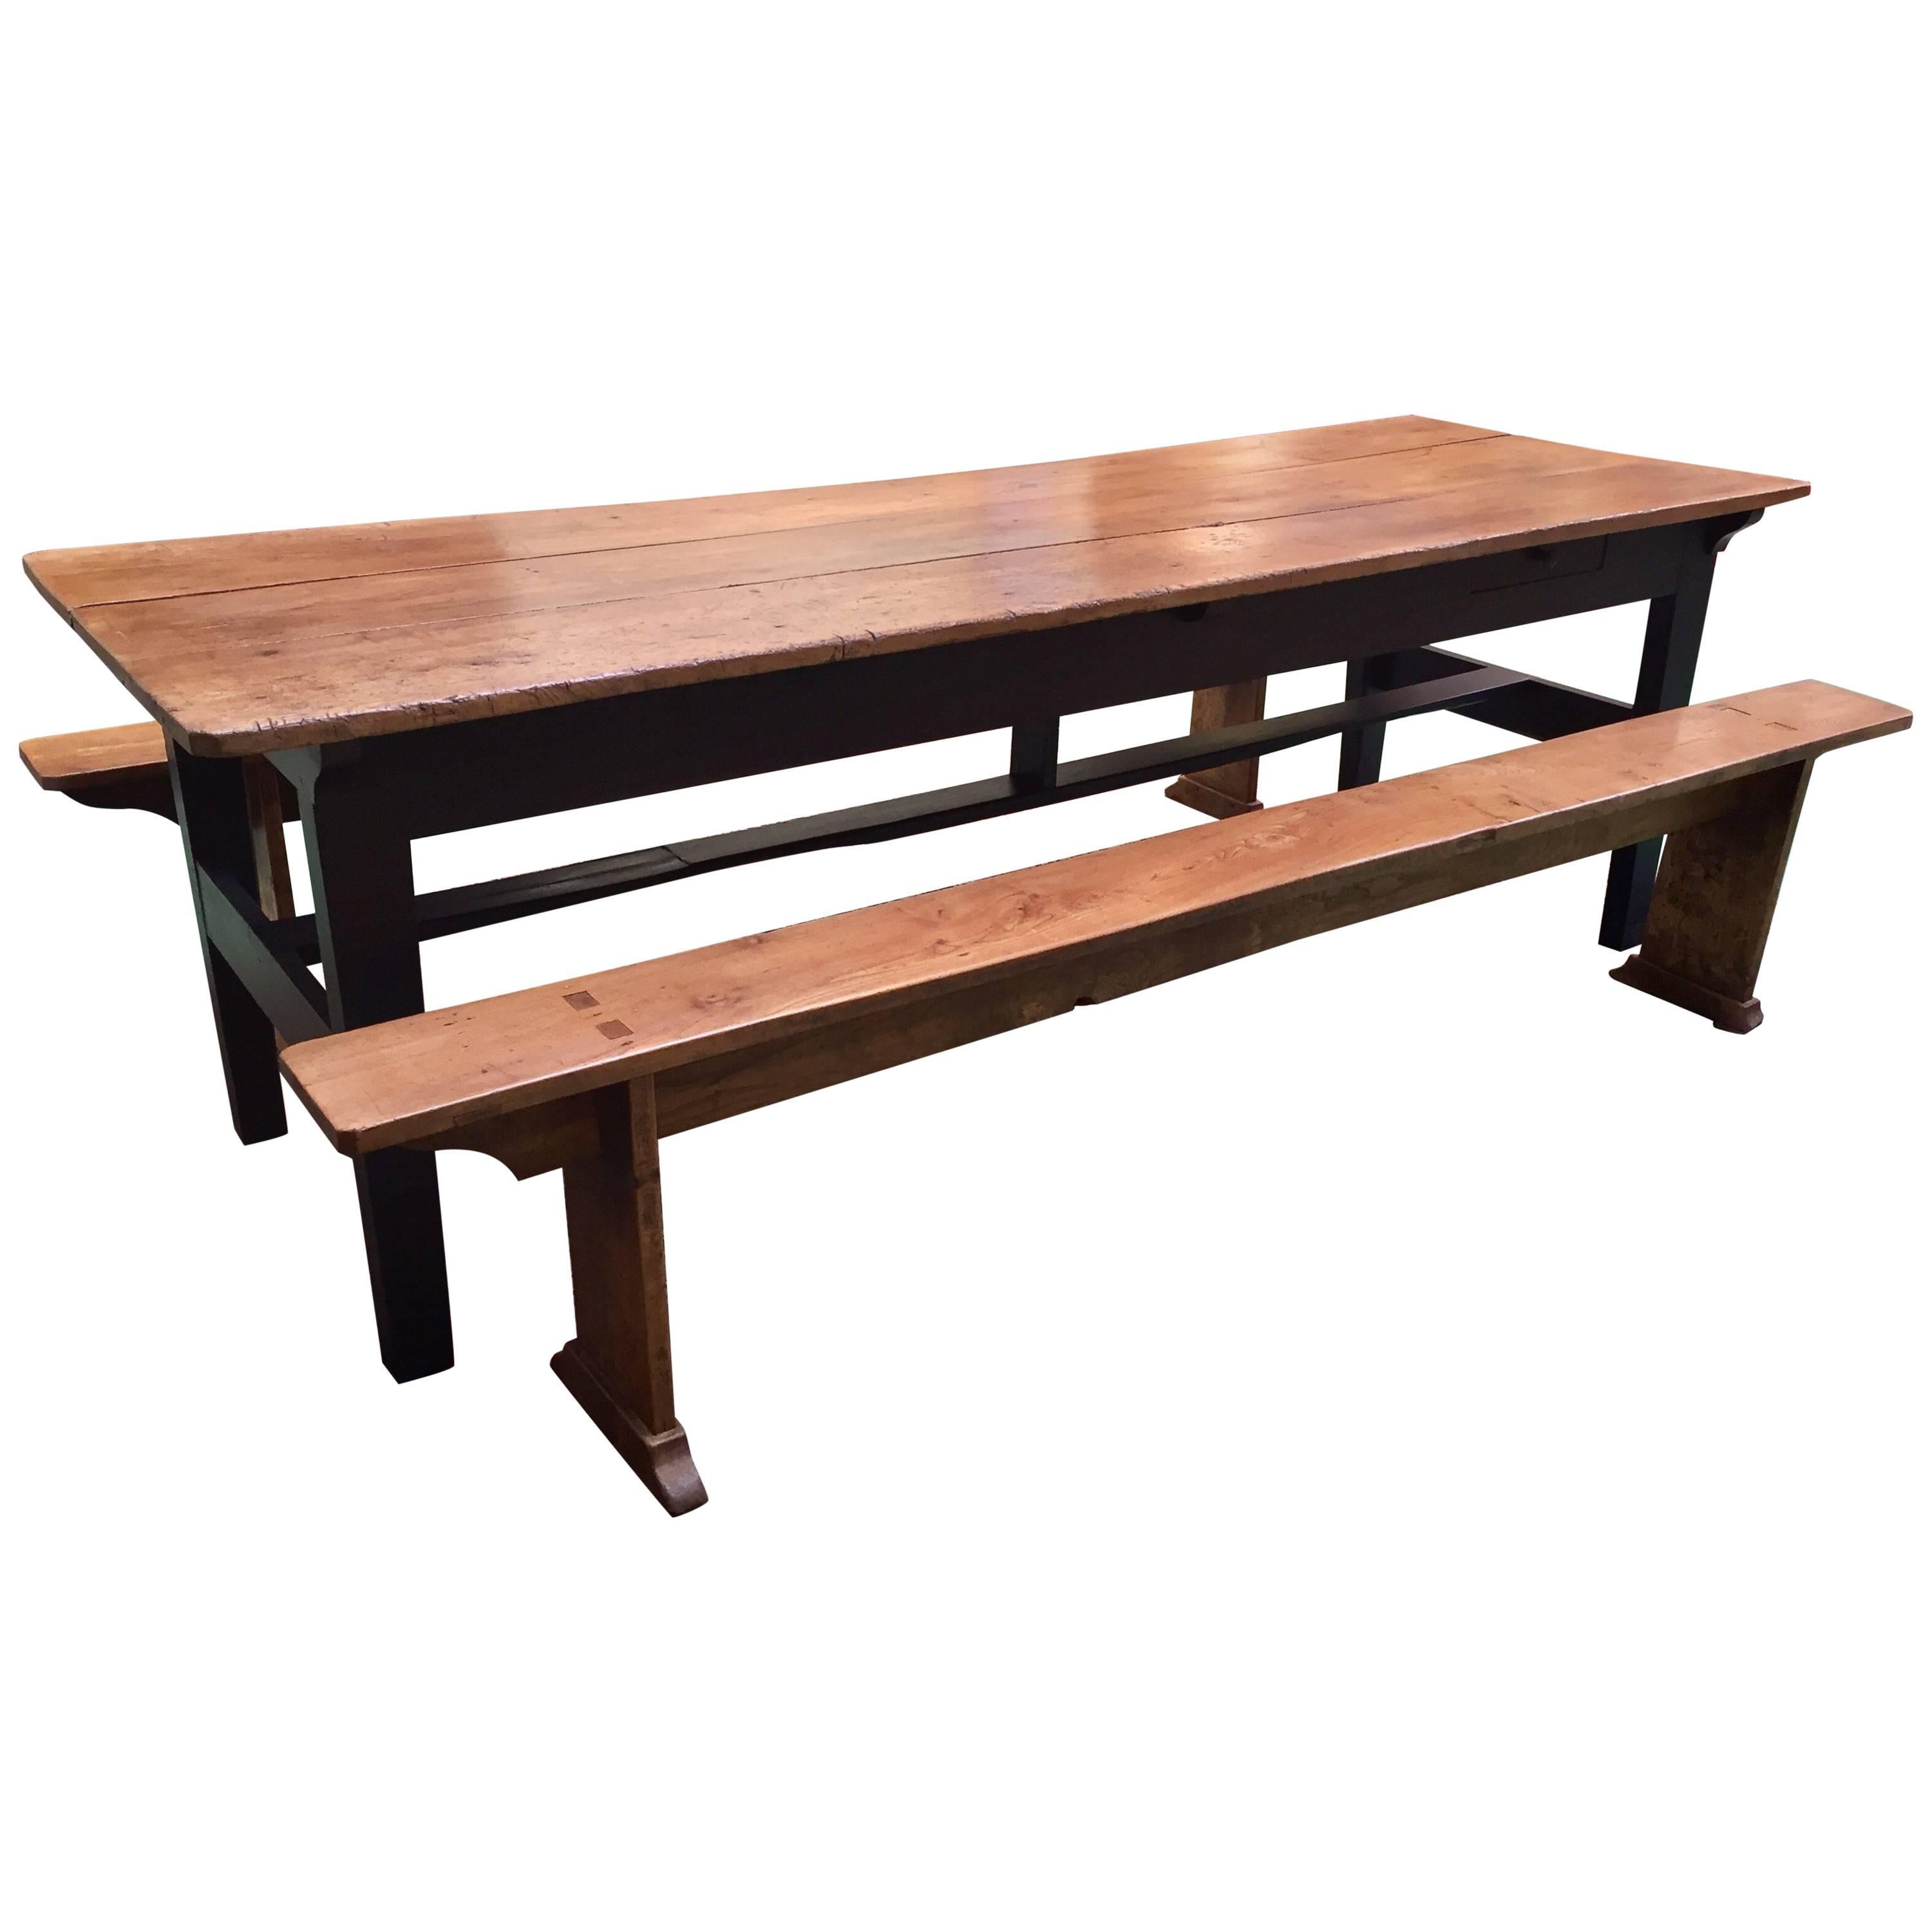 19th Century Elm Farm Table with Bench